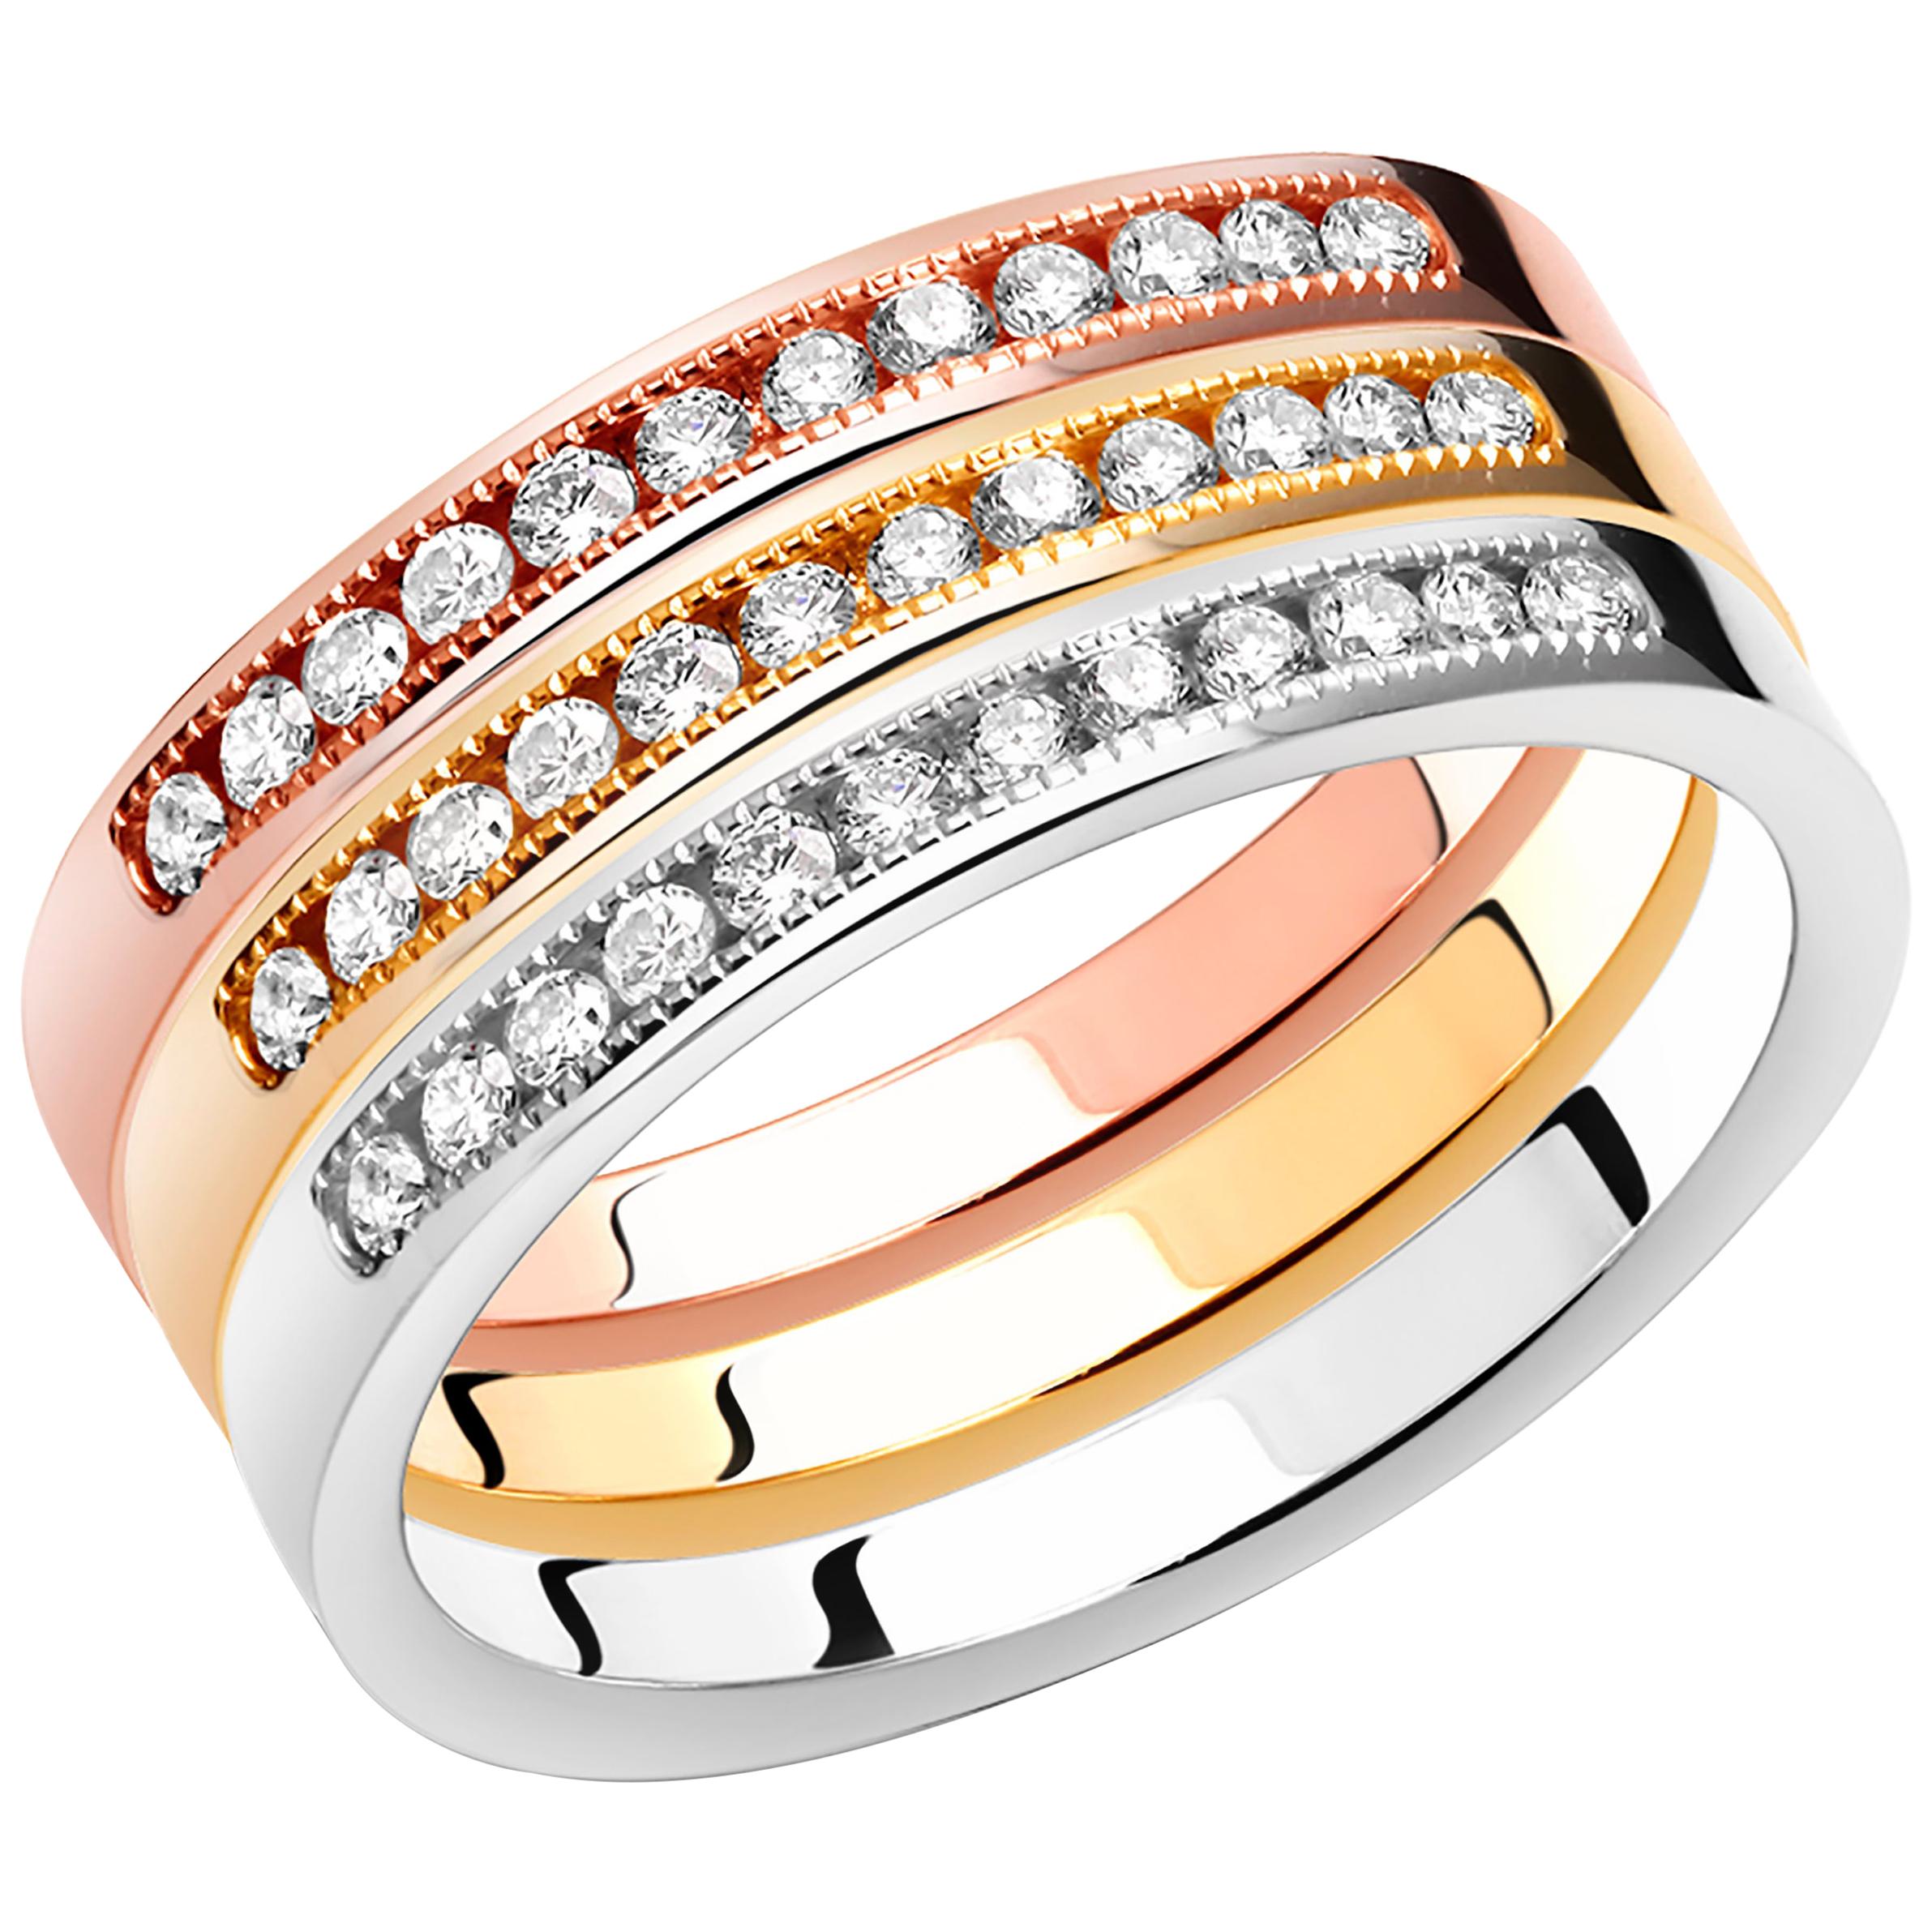 Three Diamond Partial Multi-Color Gold Stacking Bands Sold as a Set